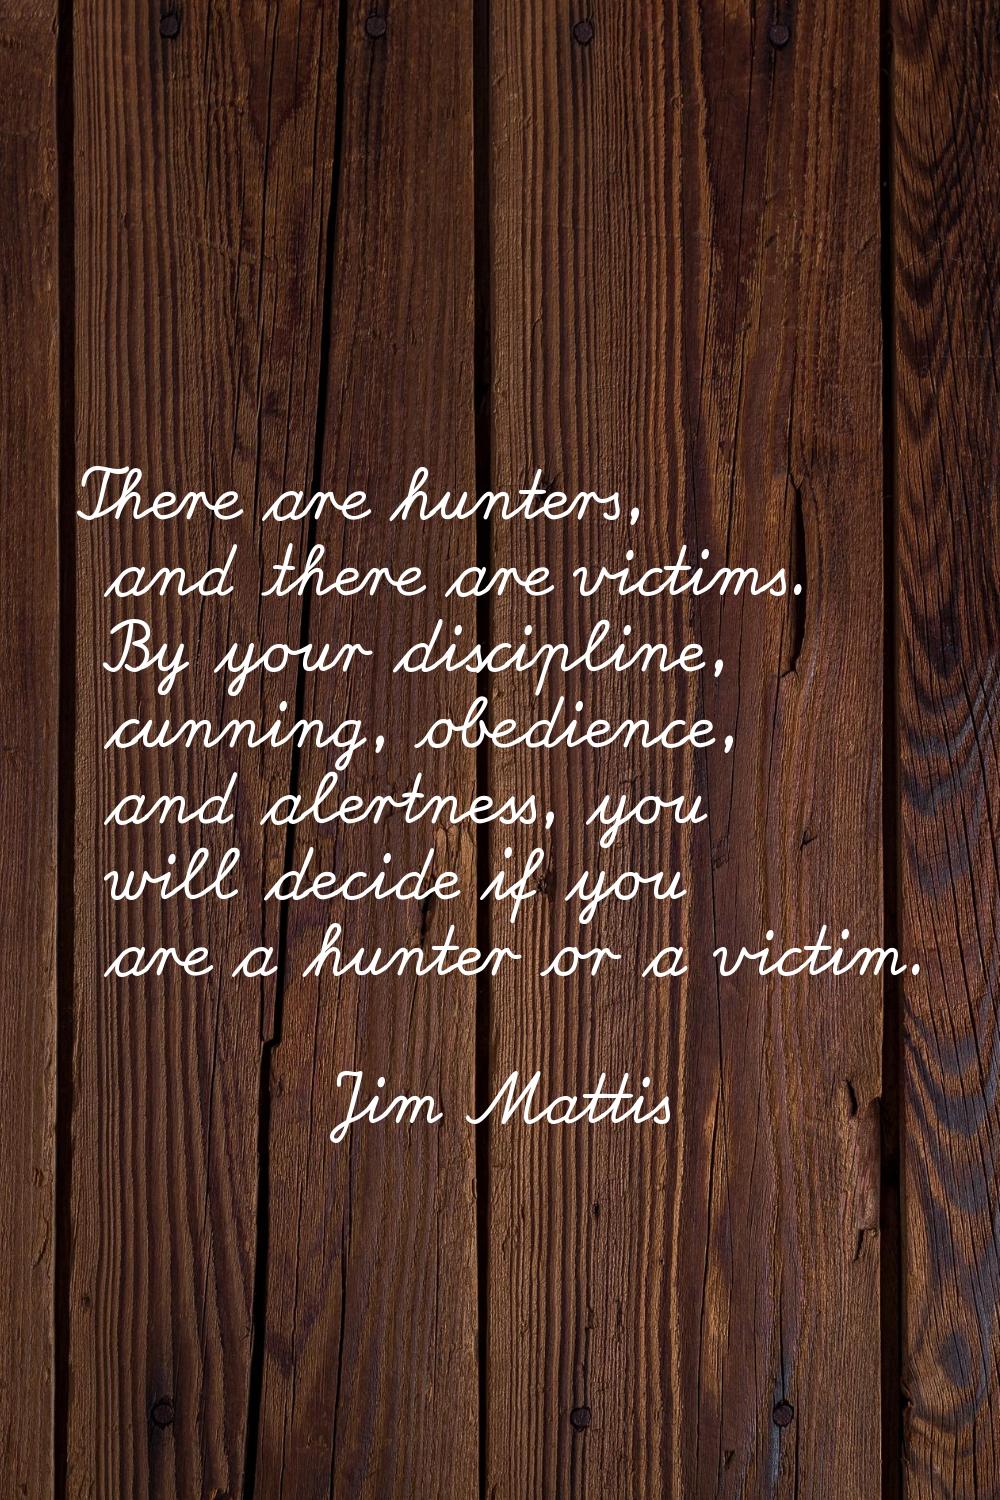 There are hunters, and there are victims. By your discipline, cunning, obedience, and alertness, yo